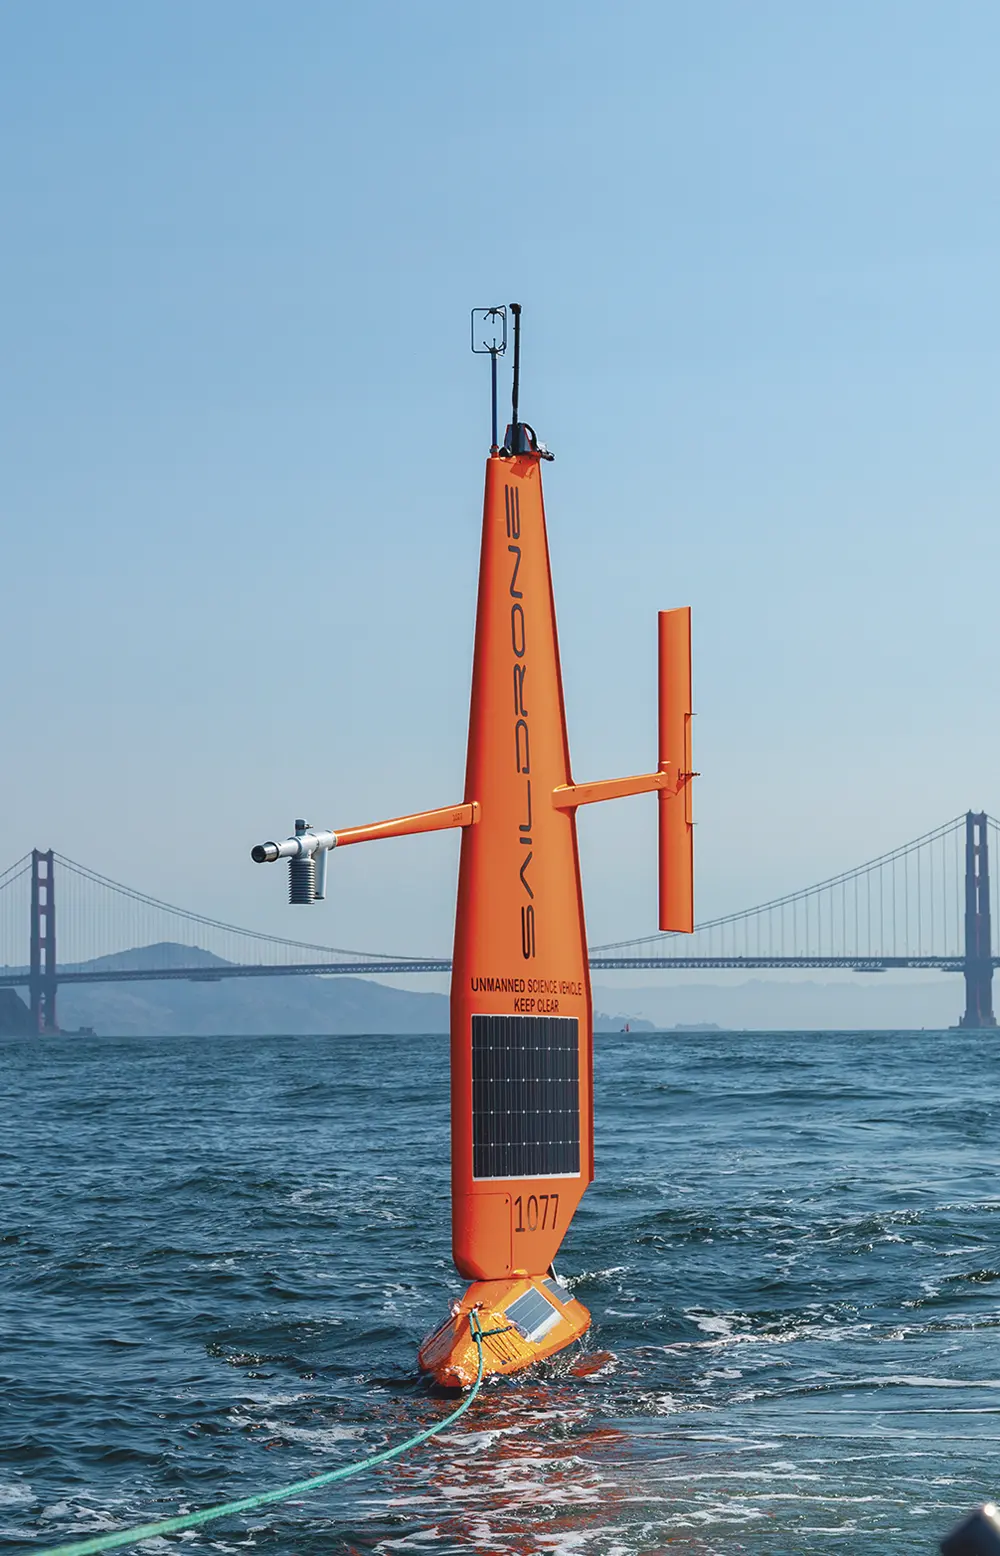 a bat detector mounted on a Saildrone autonomous vehicle sailing against the background of the Golden Gate Bridge and tethered to a rope that leads of frame